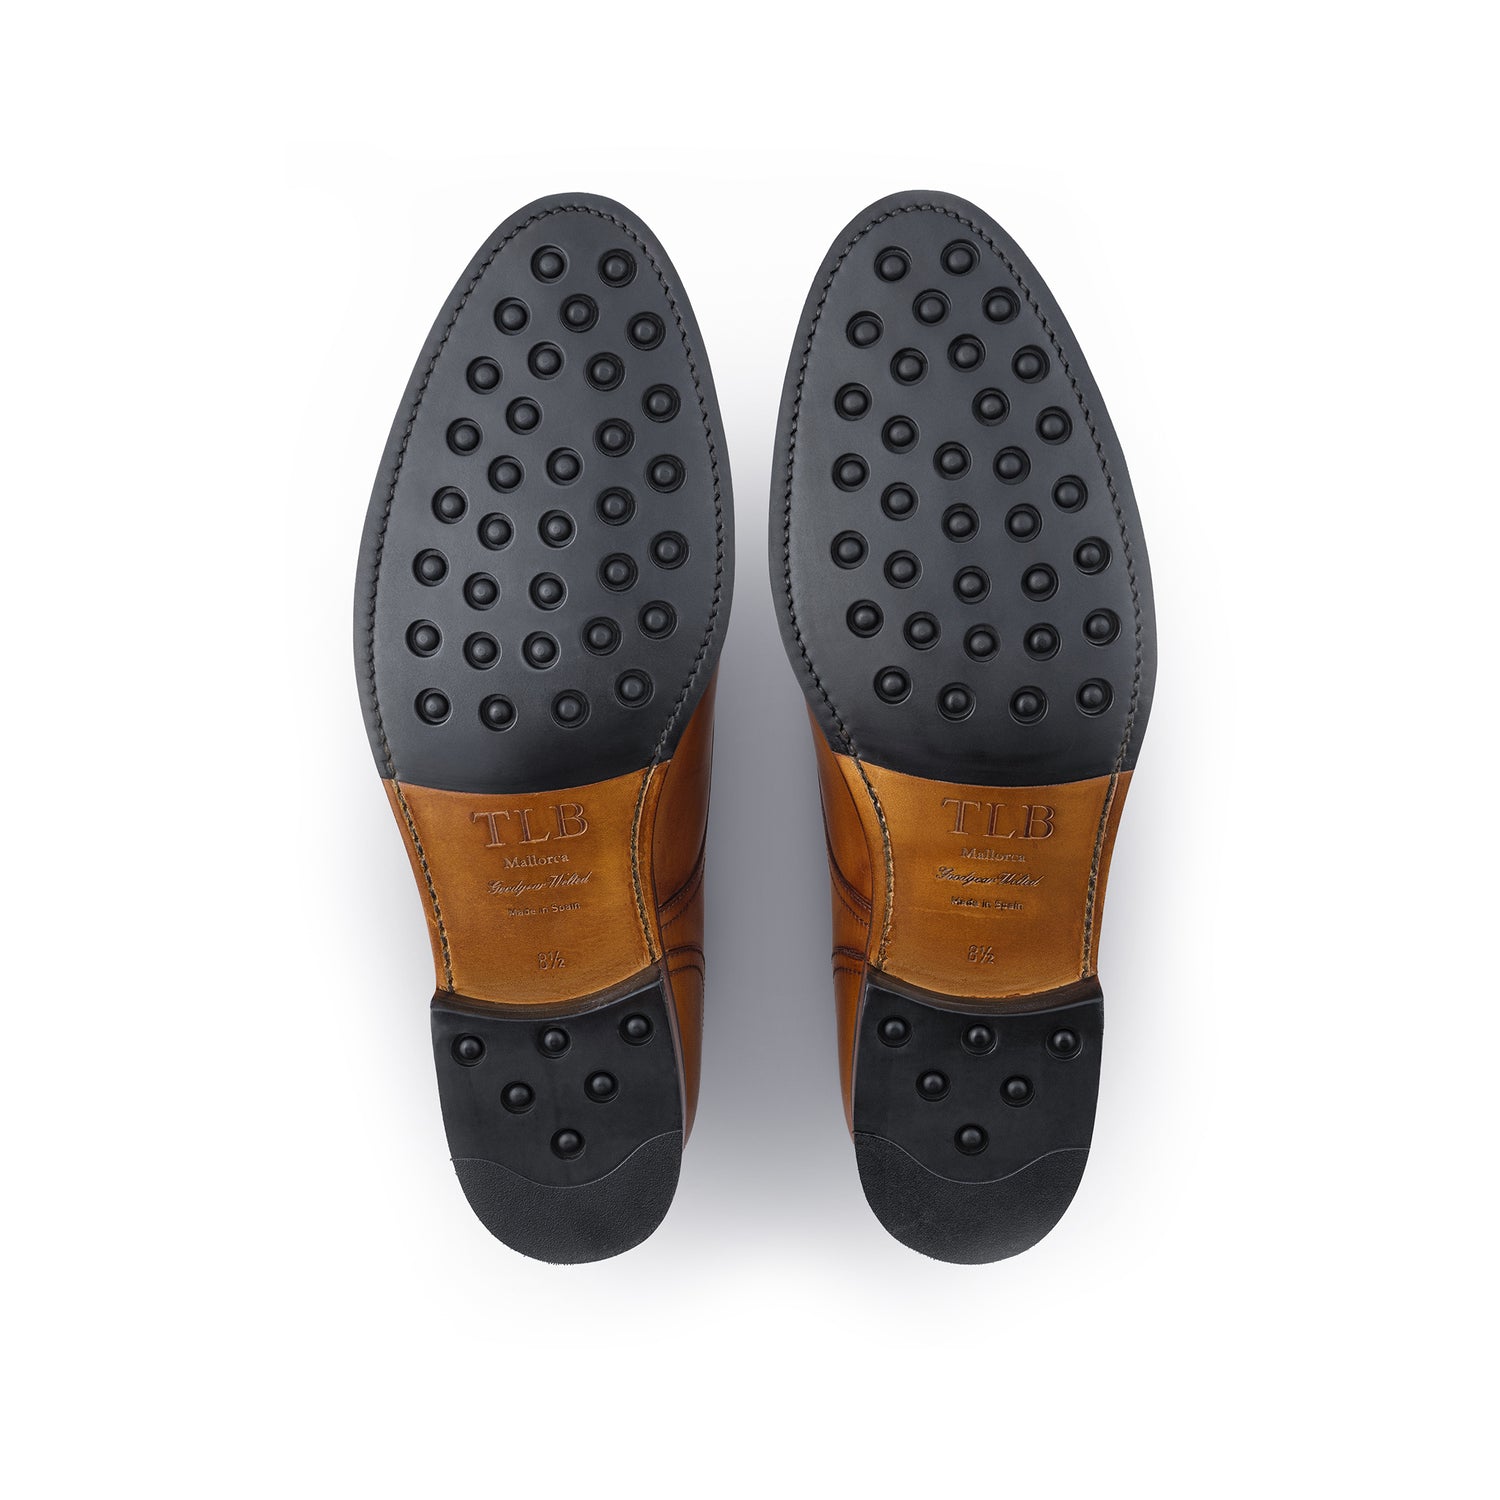 TLB Mallorca Men's shoes made in Spain